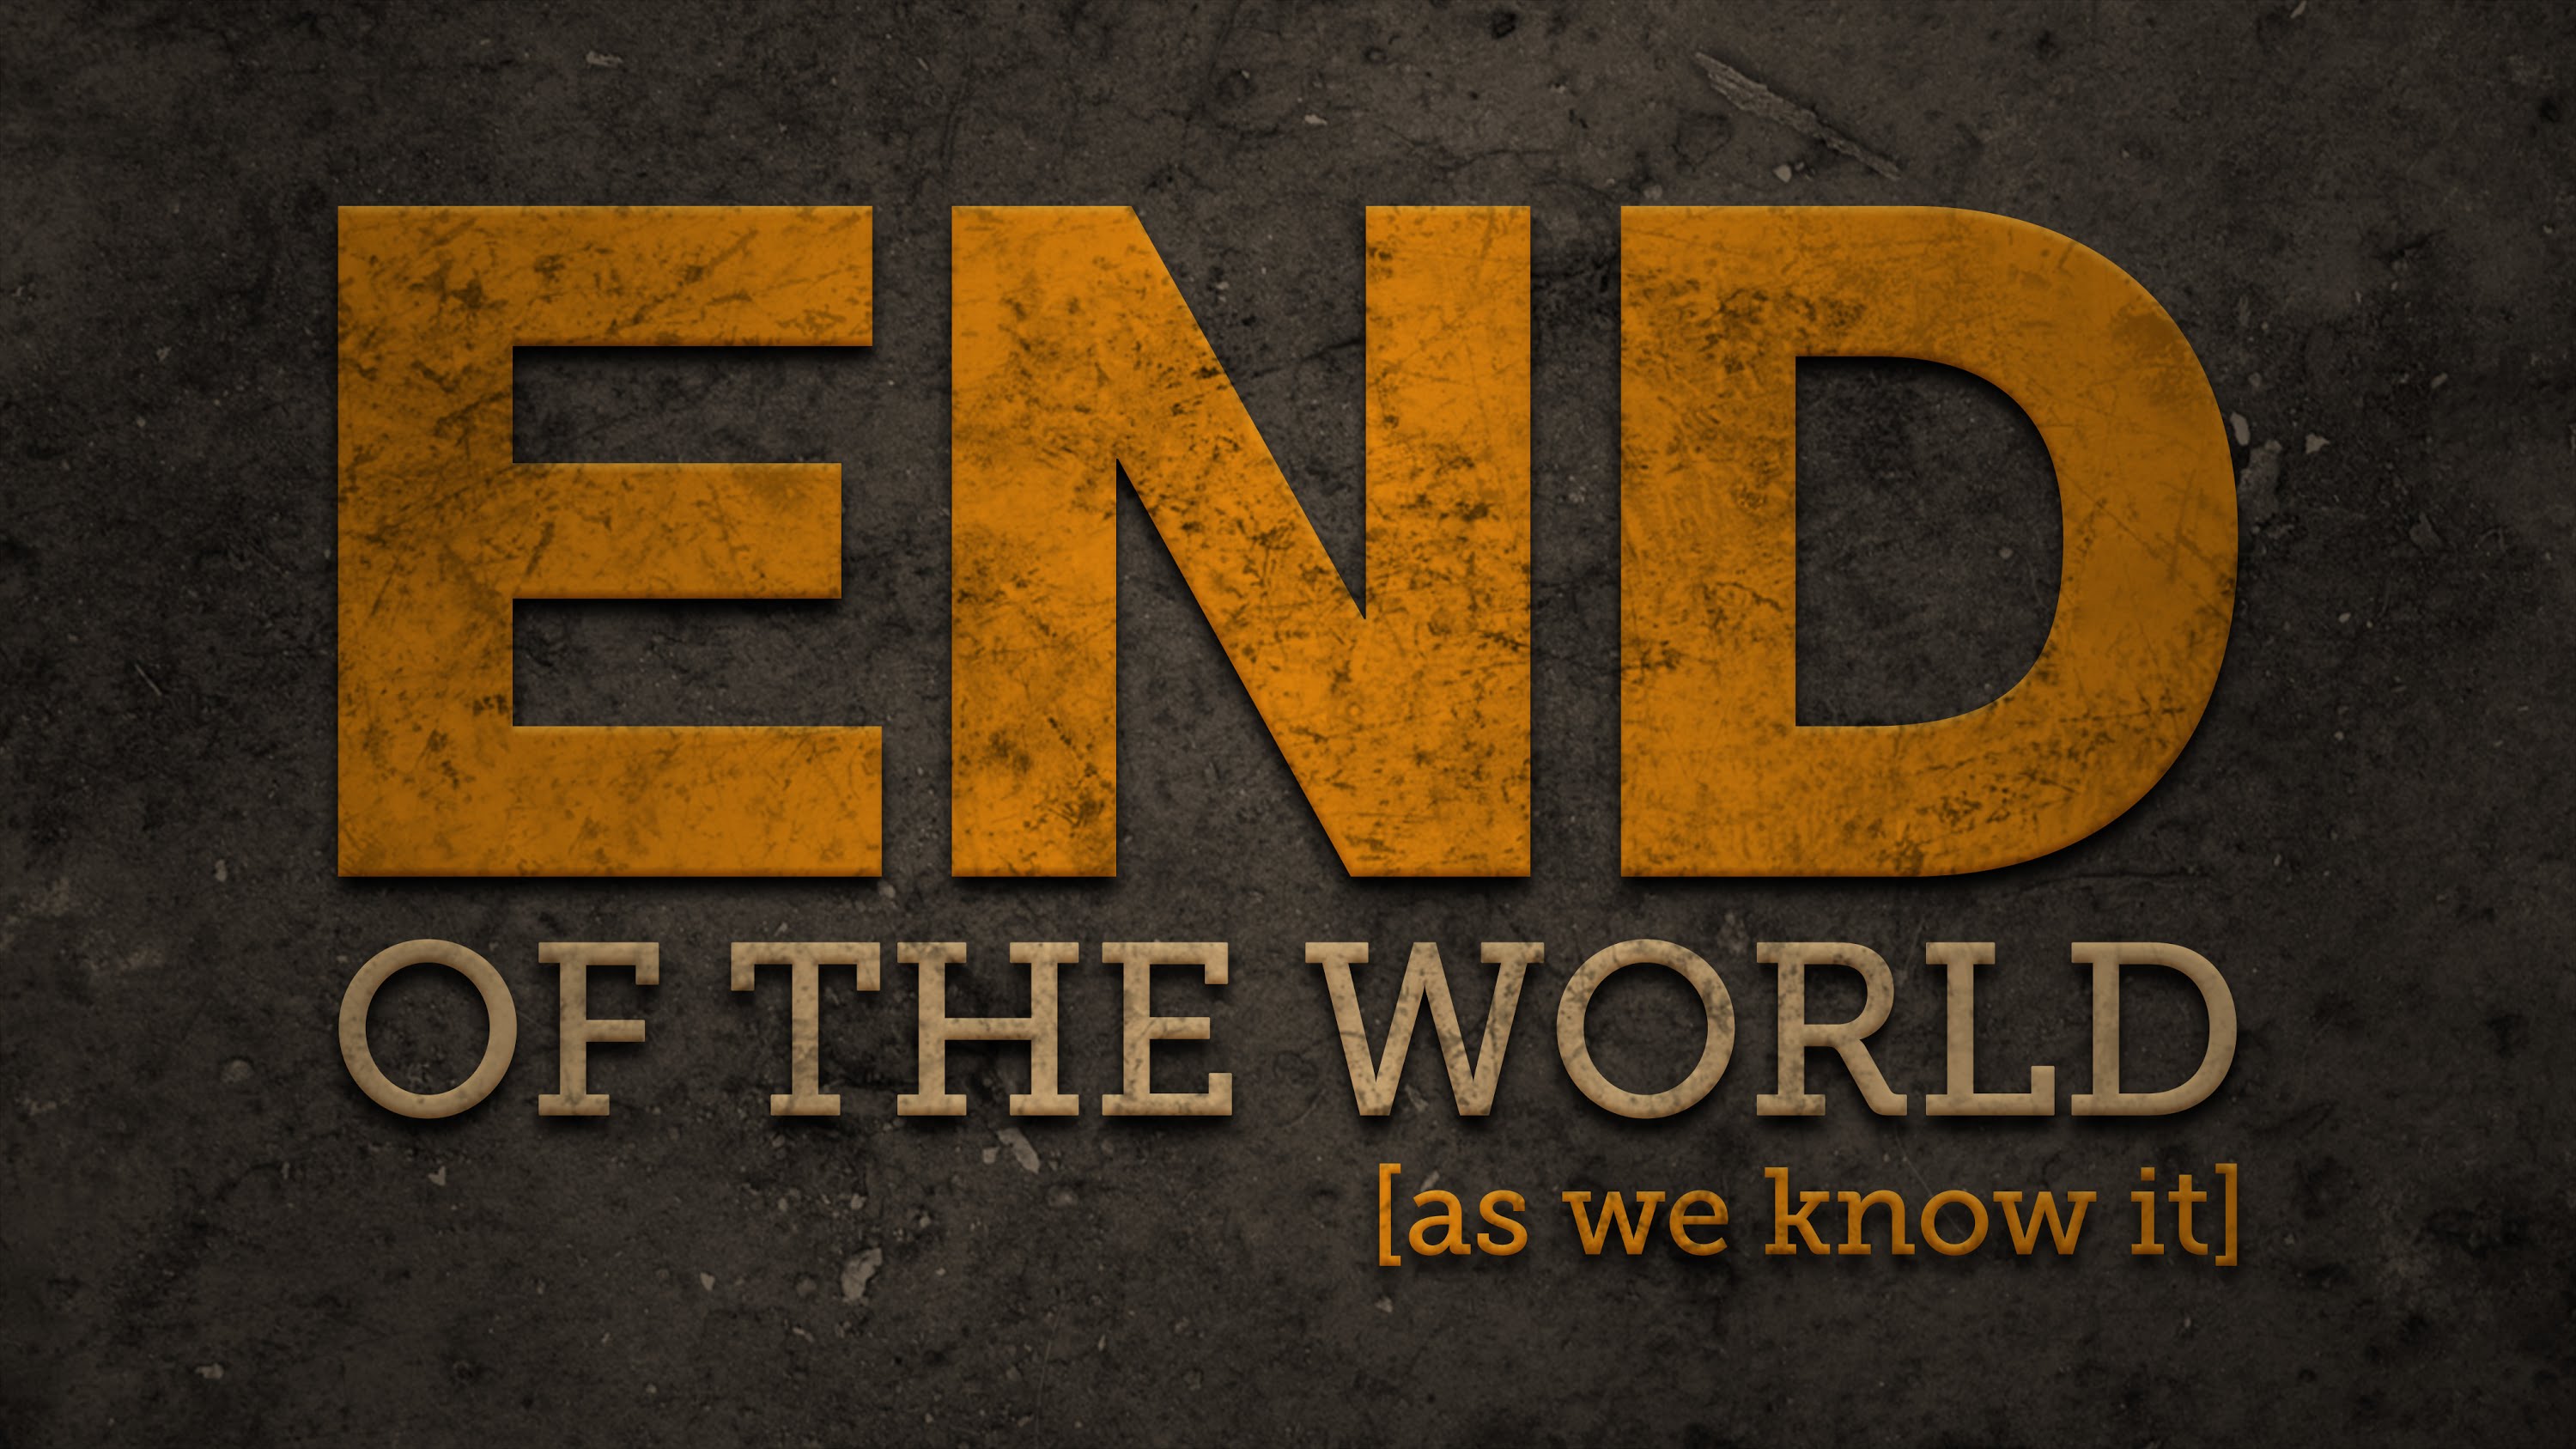 THE END OF THE WORLD-SEPTEMBER 2015